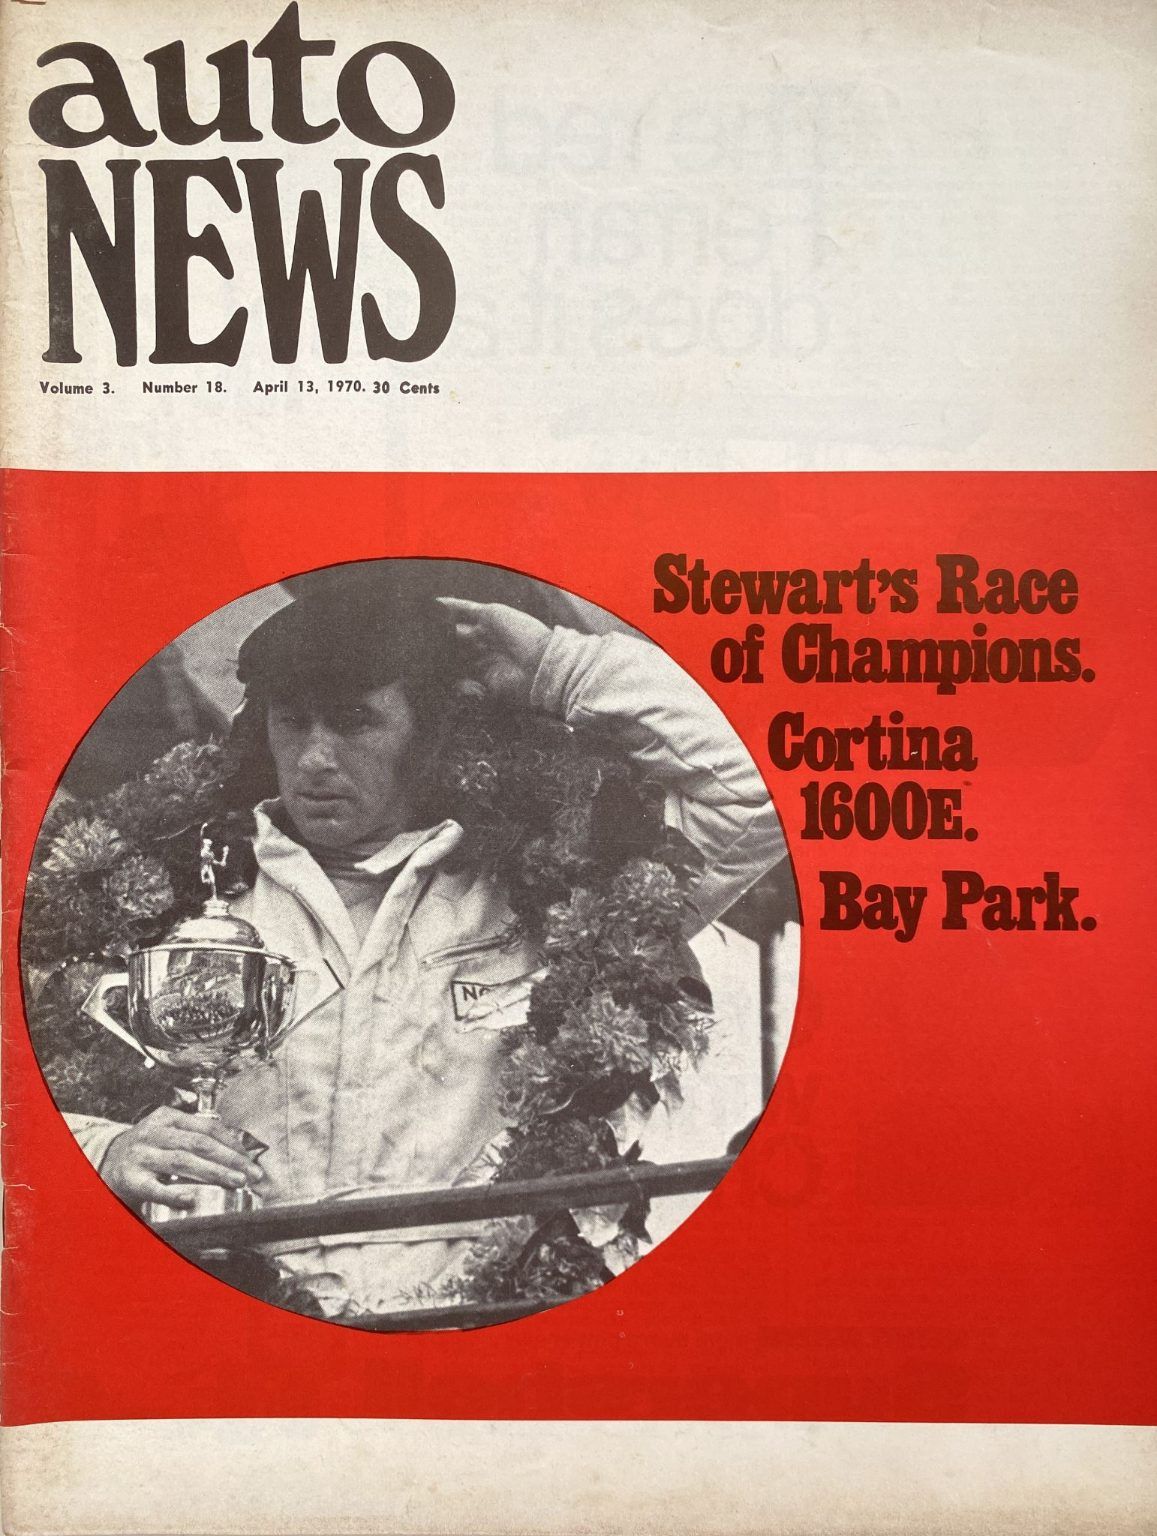 OLD MAGAZINE: Auto News - Vol. 3, Number 18, 13th April 1970